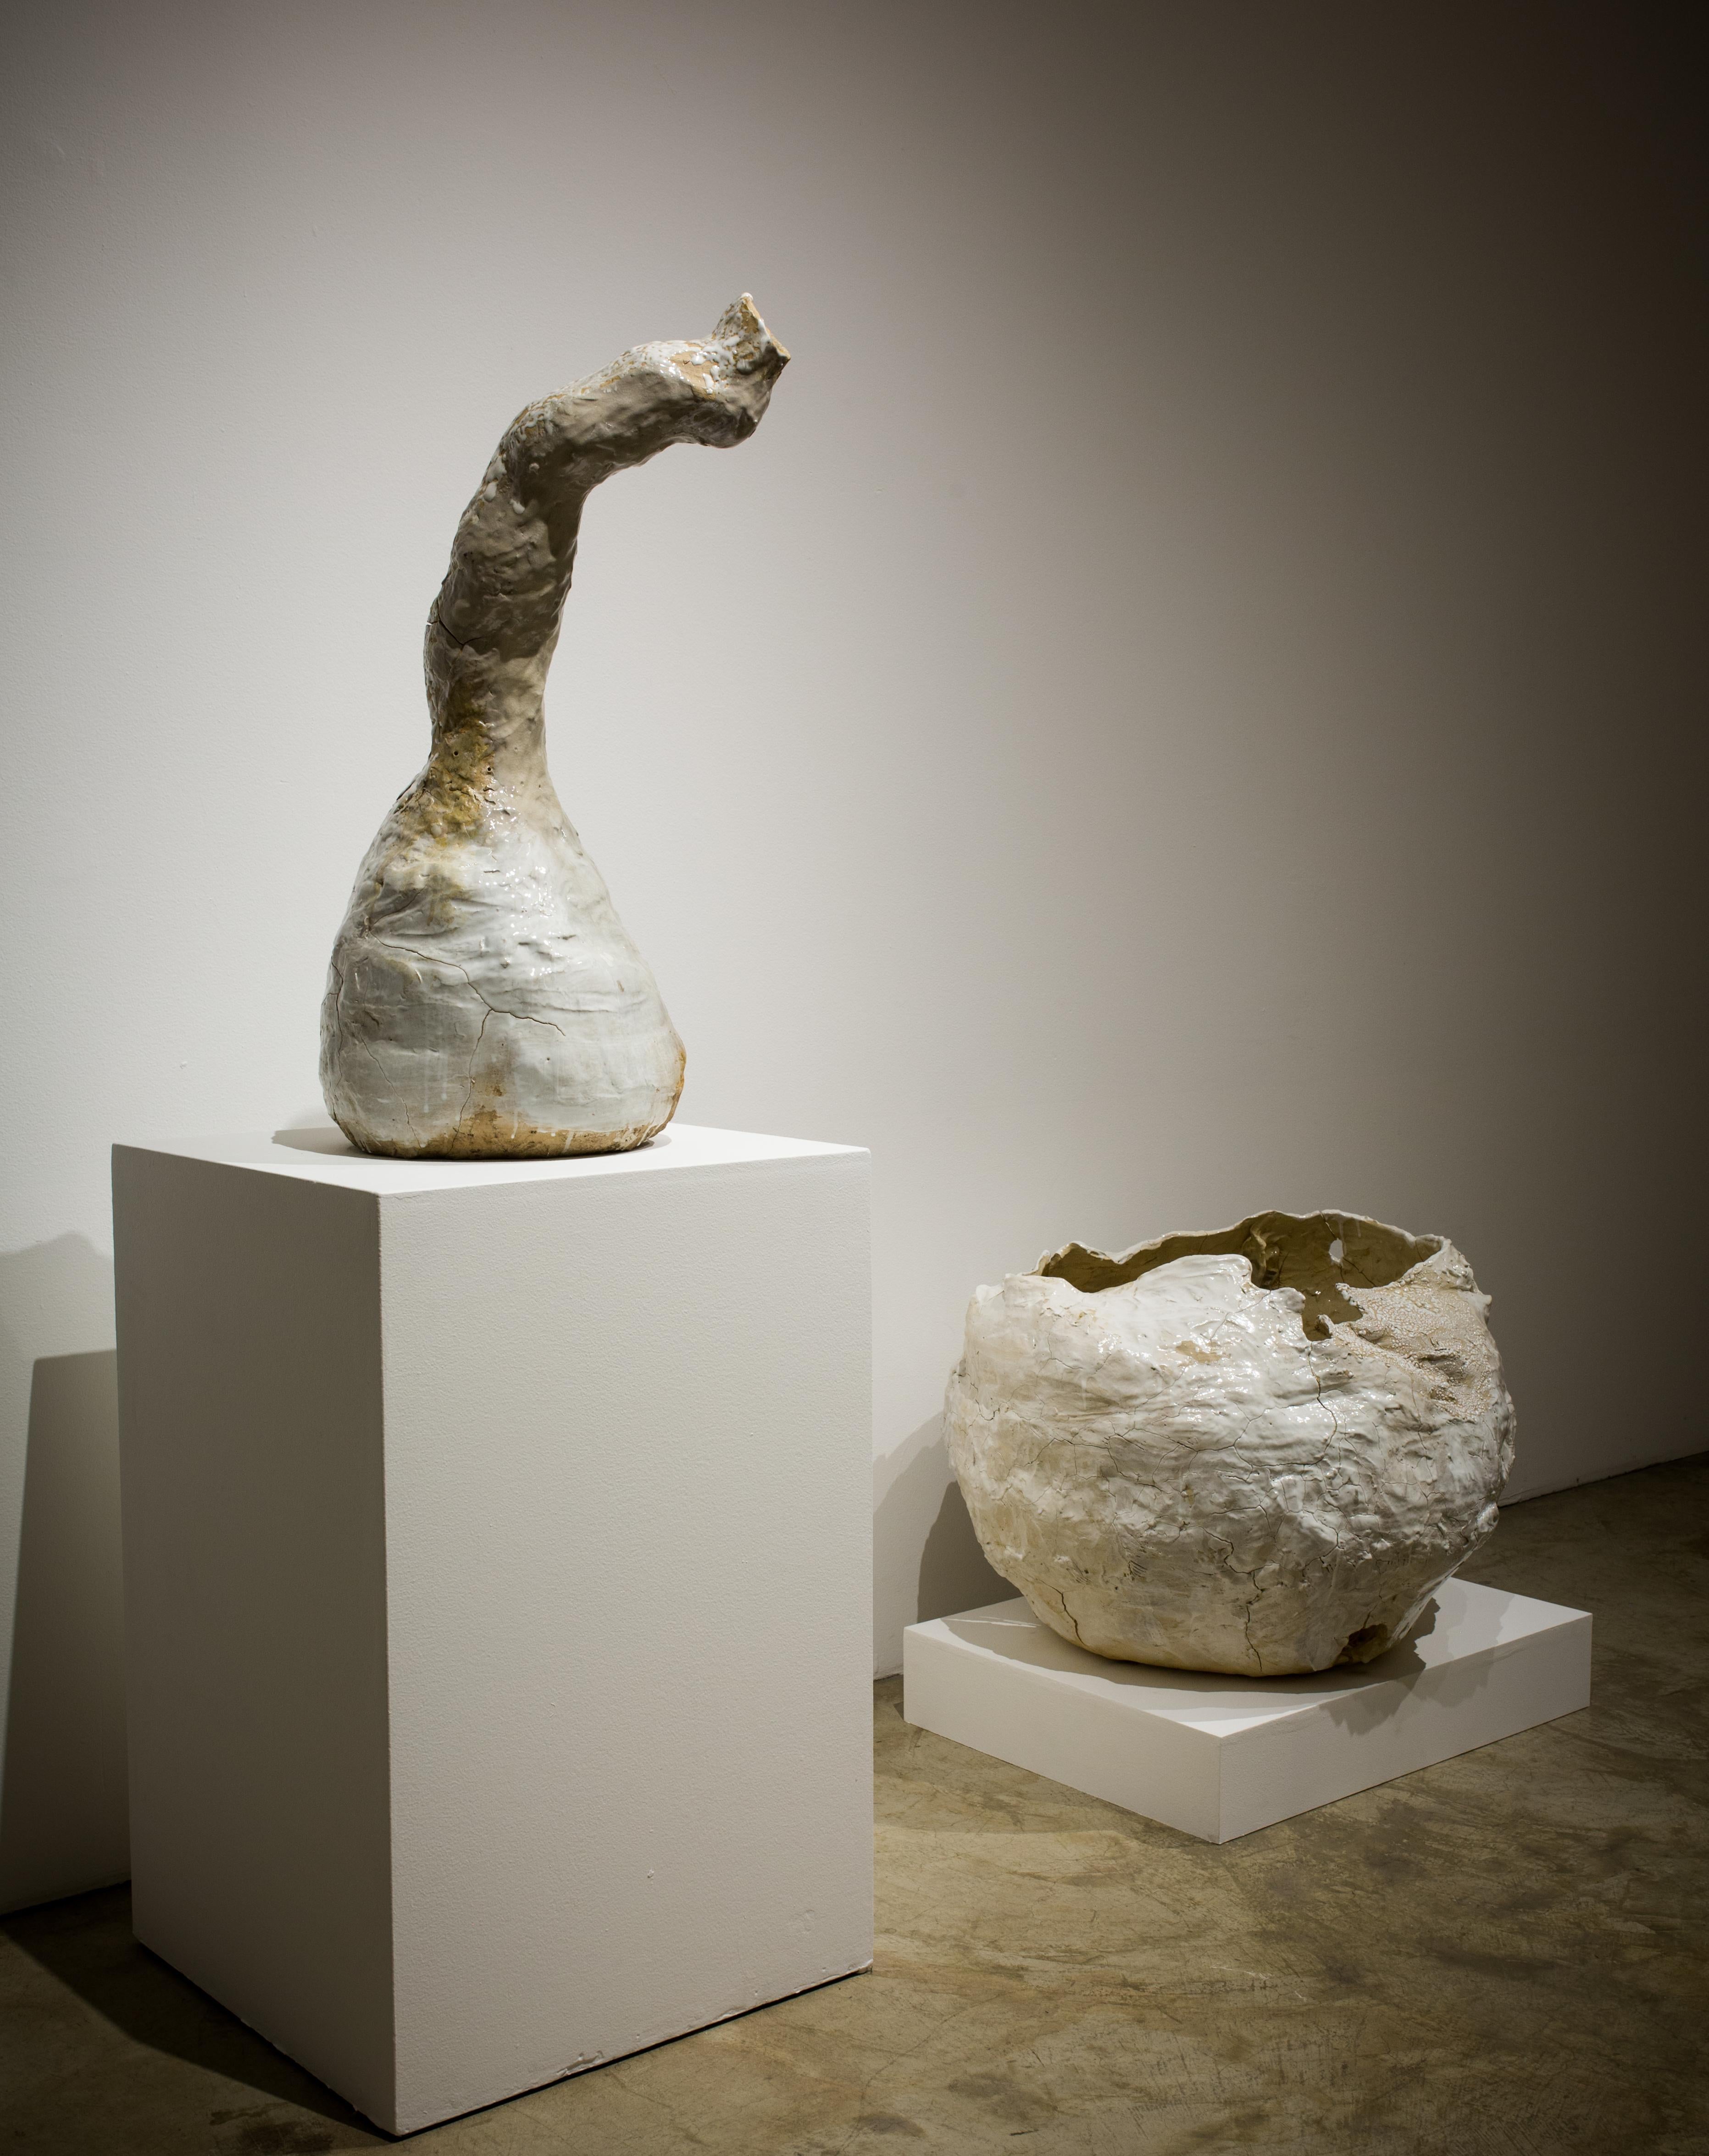 Galia Linn
Untitled. Inside Garden III, 2013
Paper clay, crawl and white glazed stoneware.
22 x 34 x 30 inches

Galia Linn is a sculptor and site-specific installation artist living and working in Los Angeles. Linn constructs relationships between